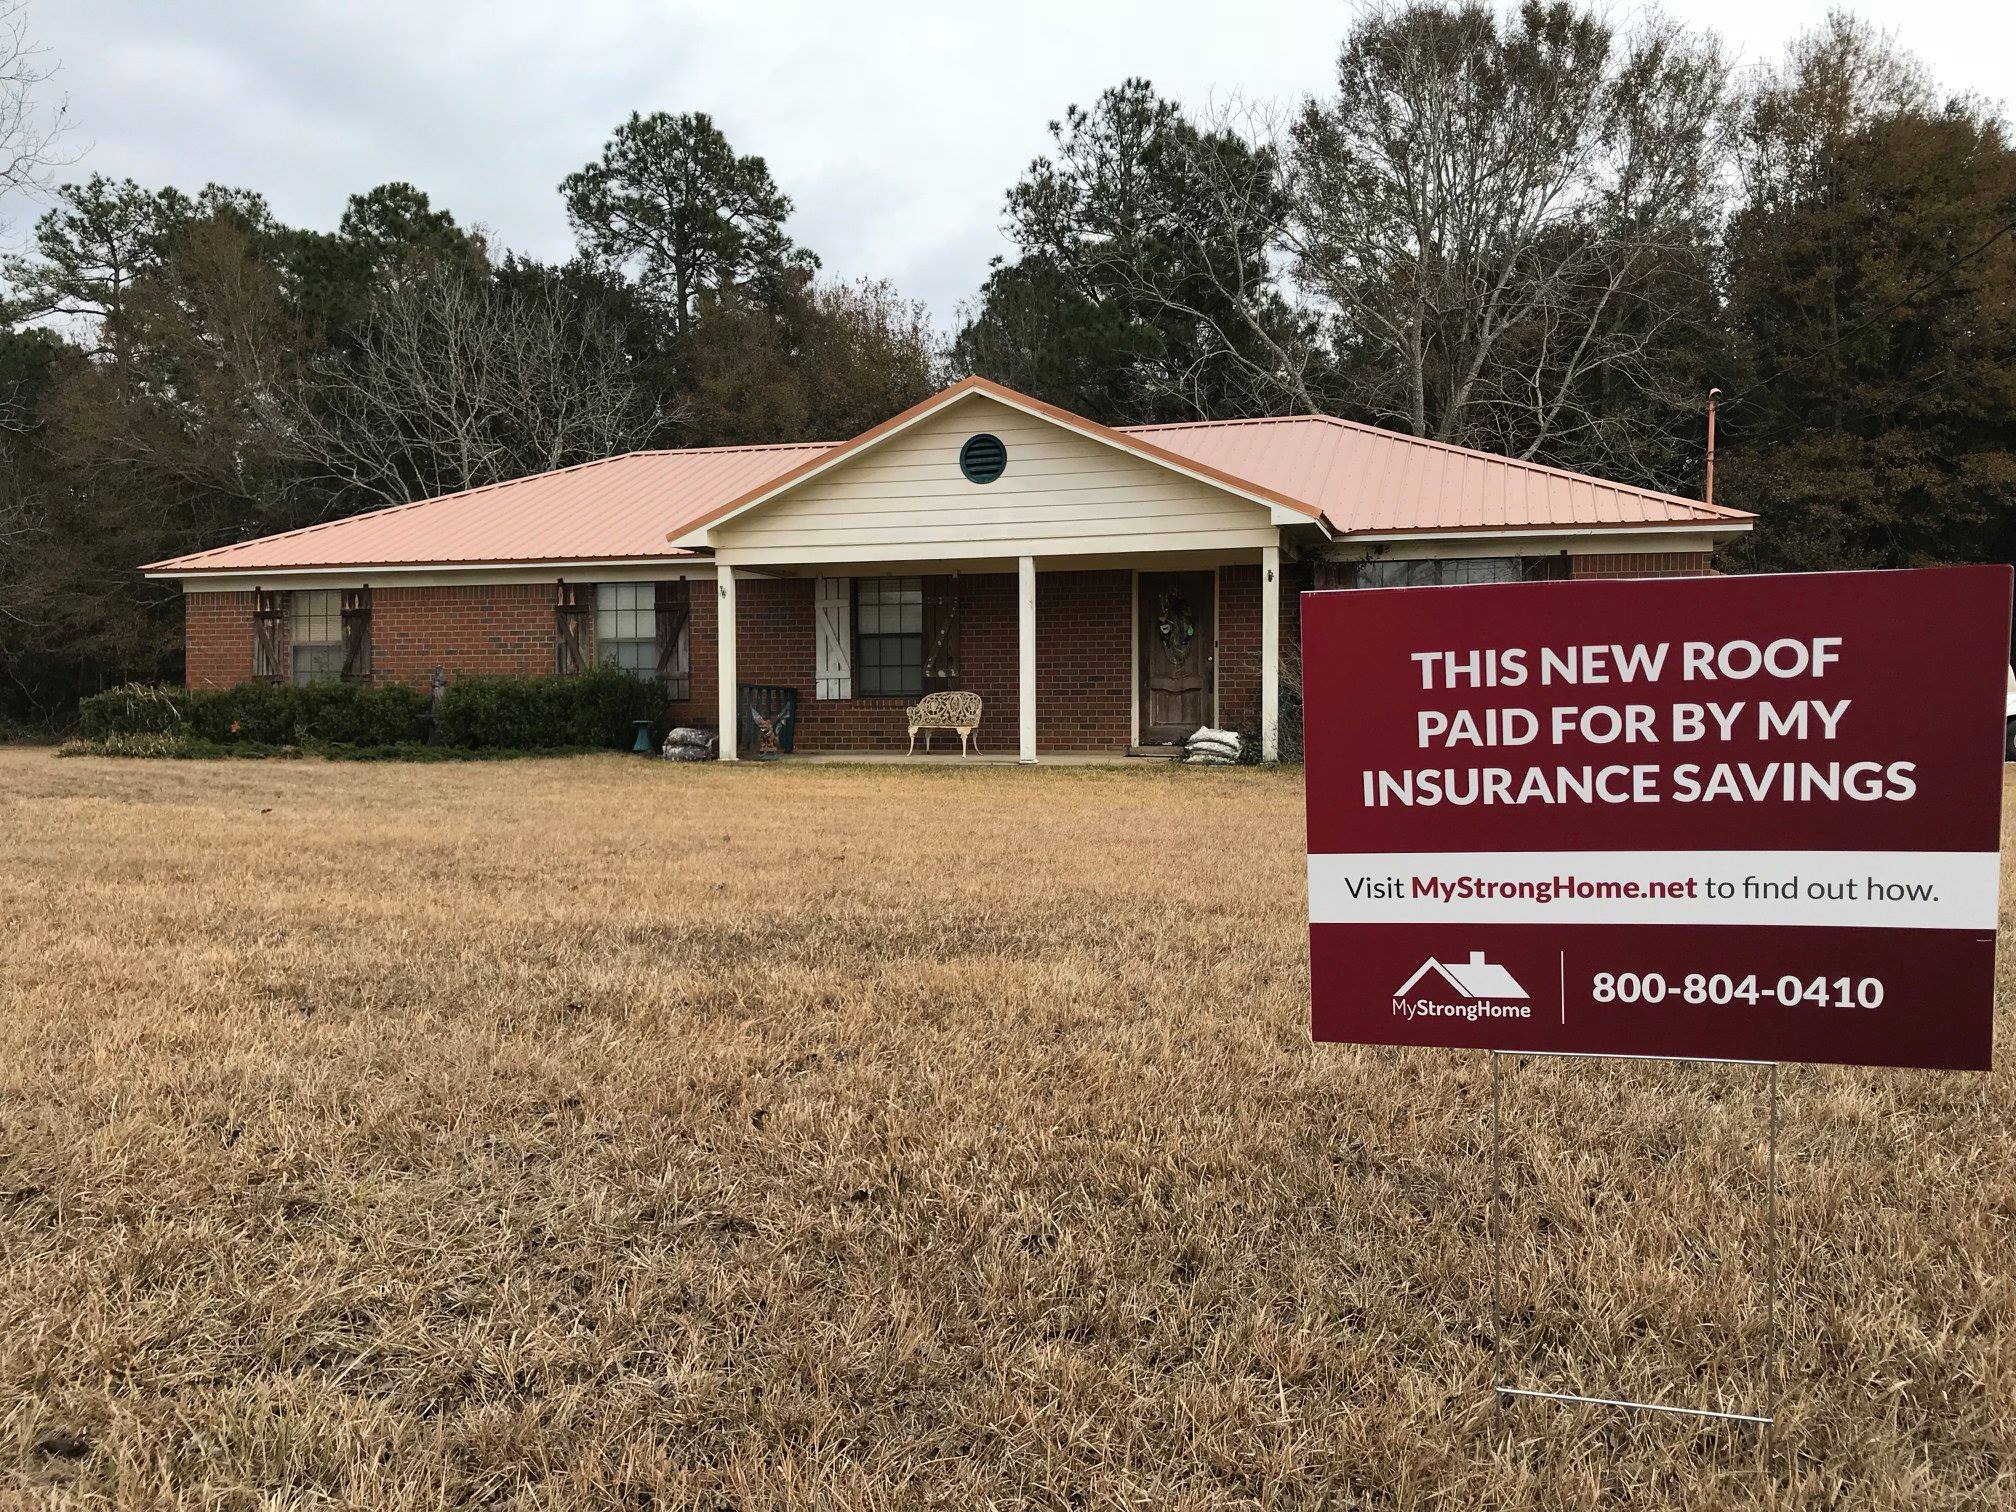 A single-story brick house with a red sign on the front lawn that reads in white lettering: "This new roof paid for by my insurance savings. Visit mystronghome . net to find out how. 800-804-0410."